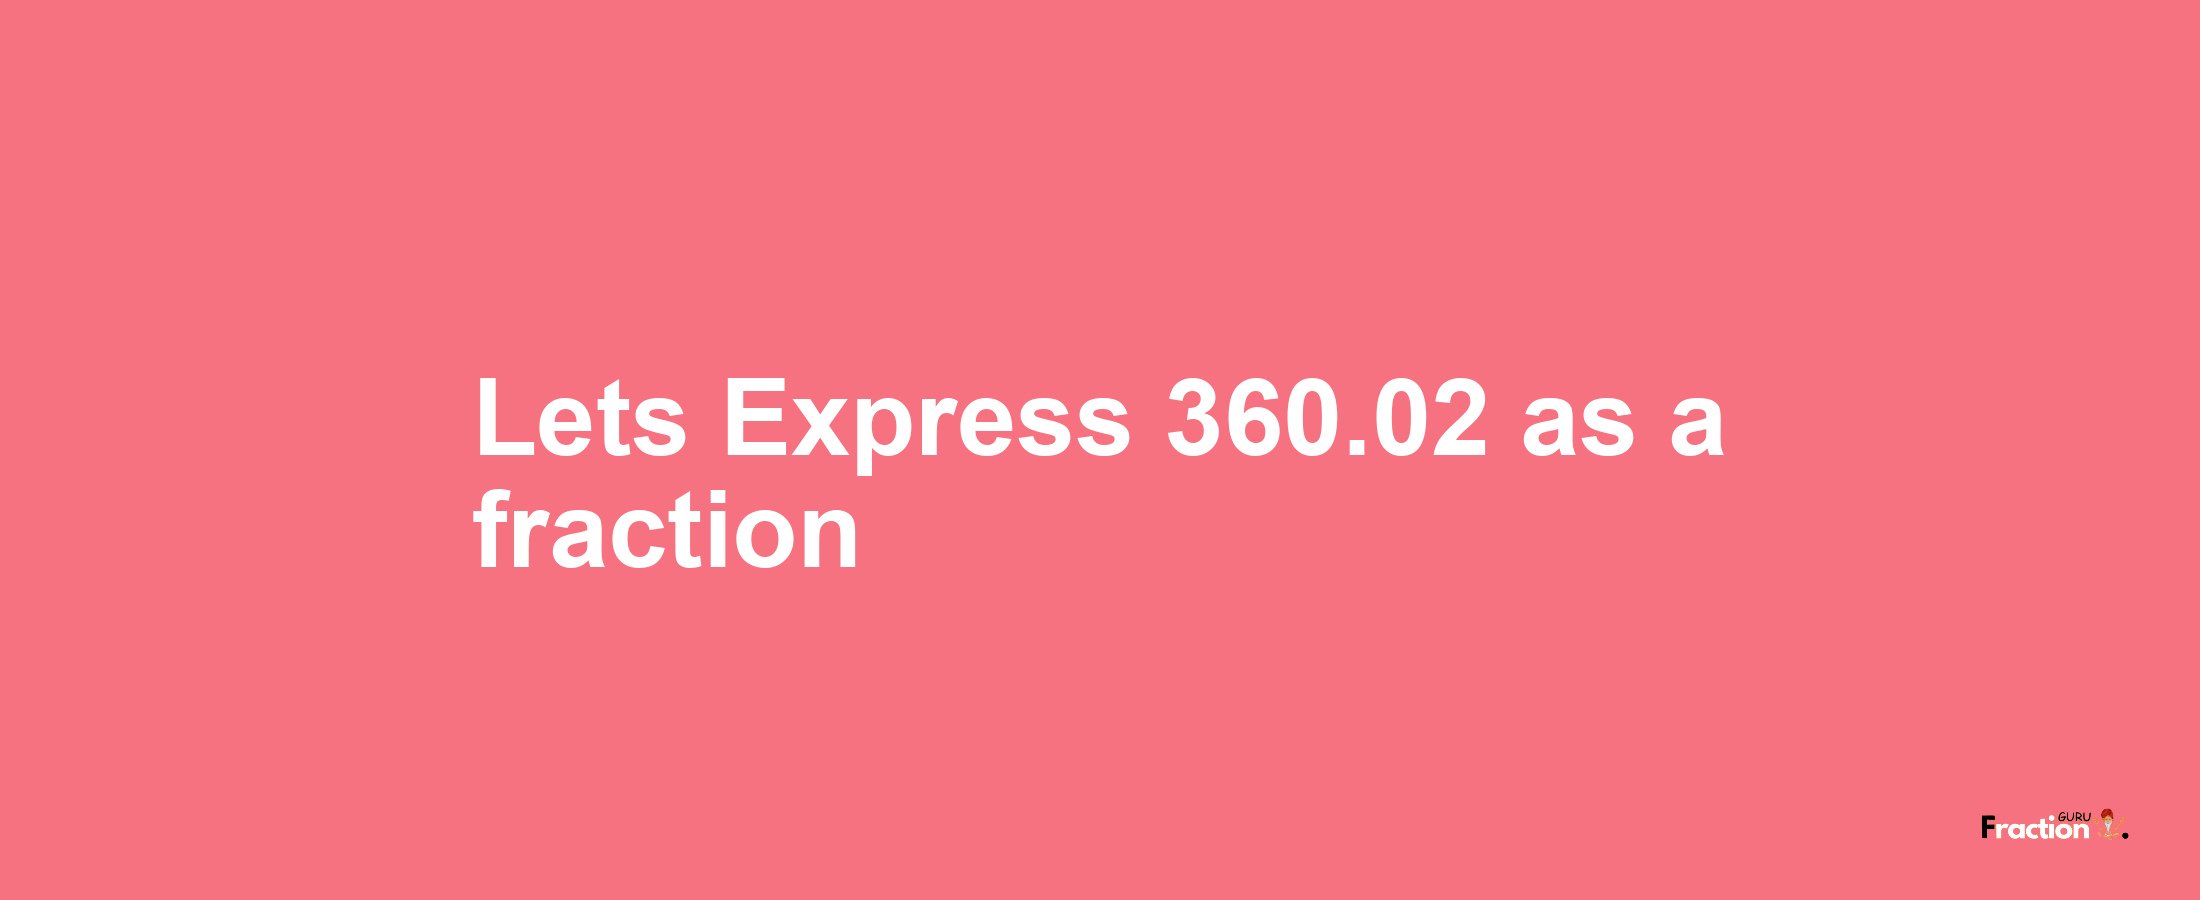 Lets Express 360.02 as afraction